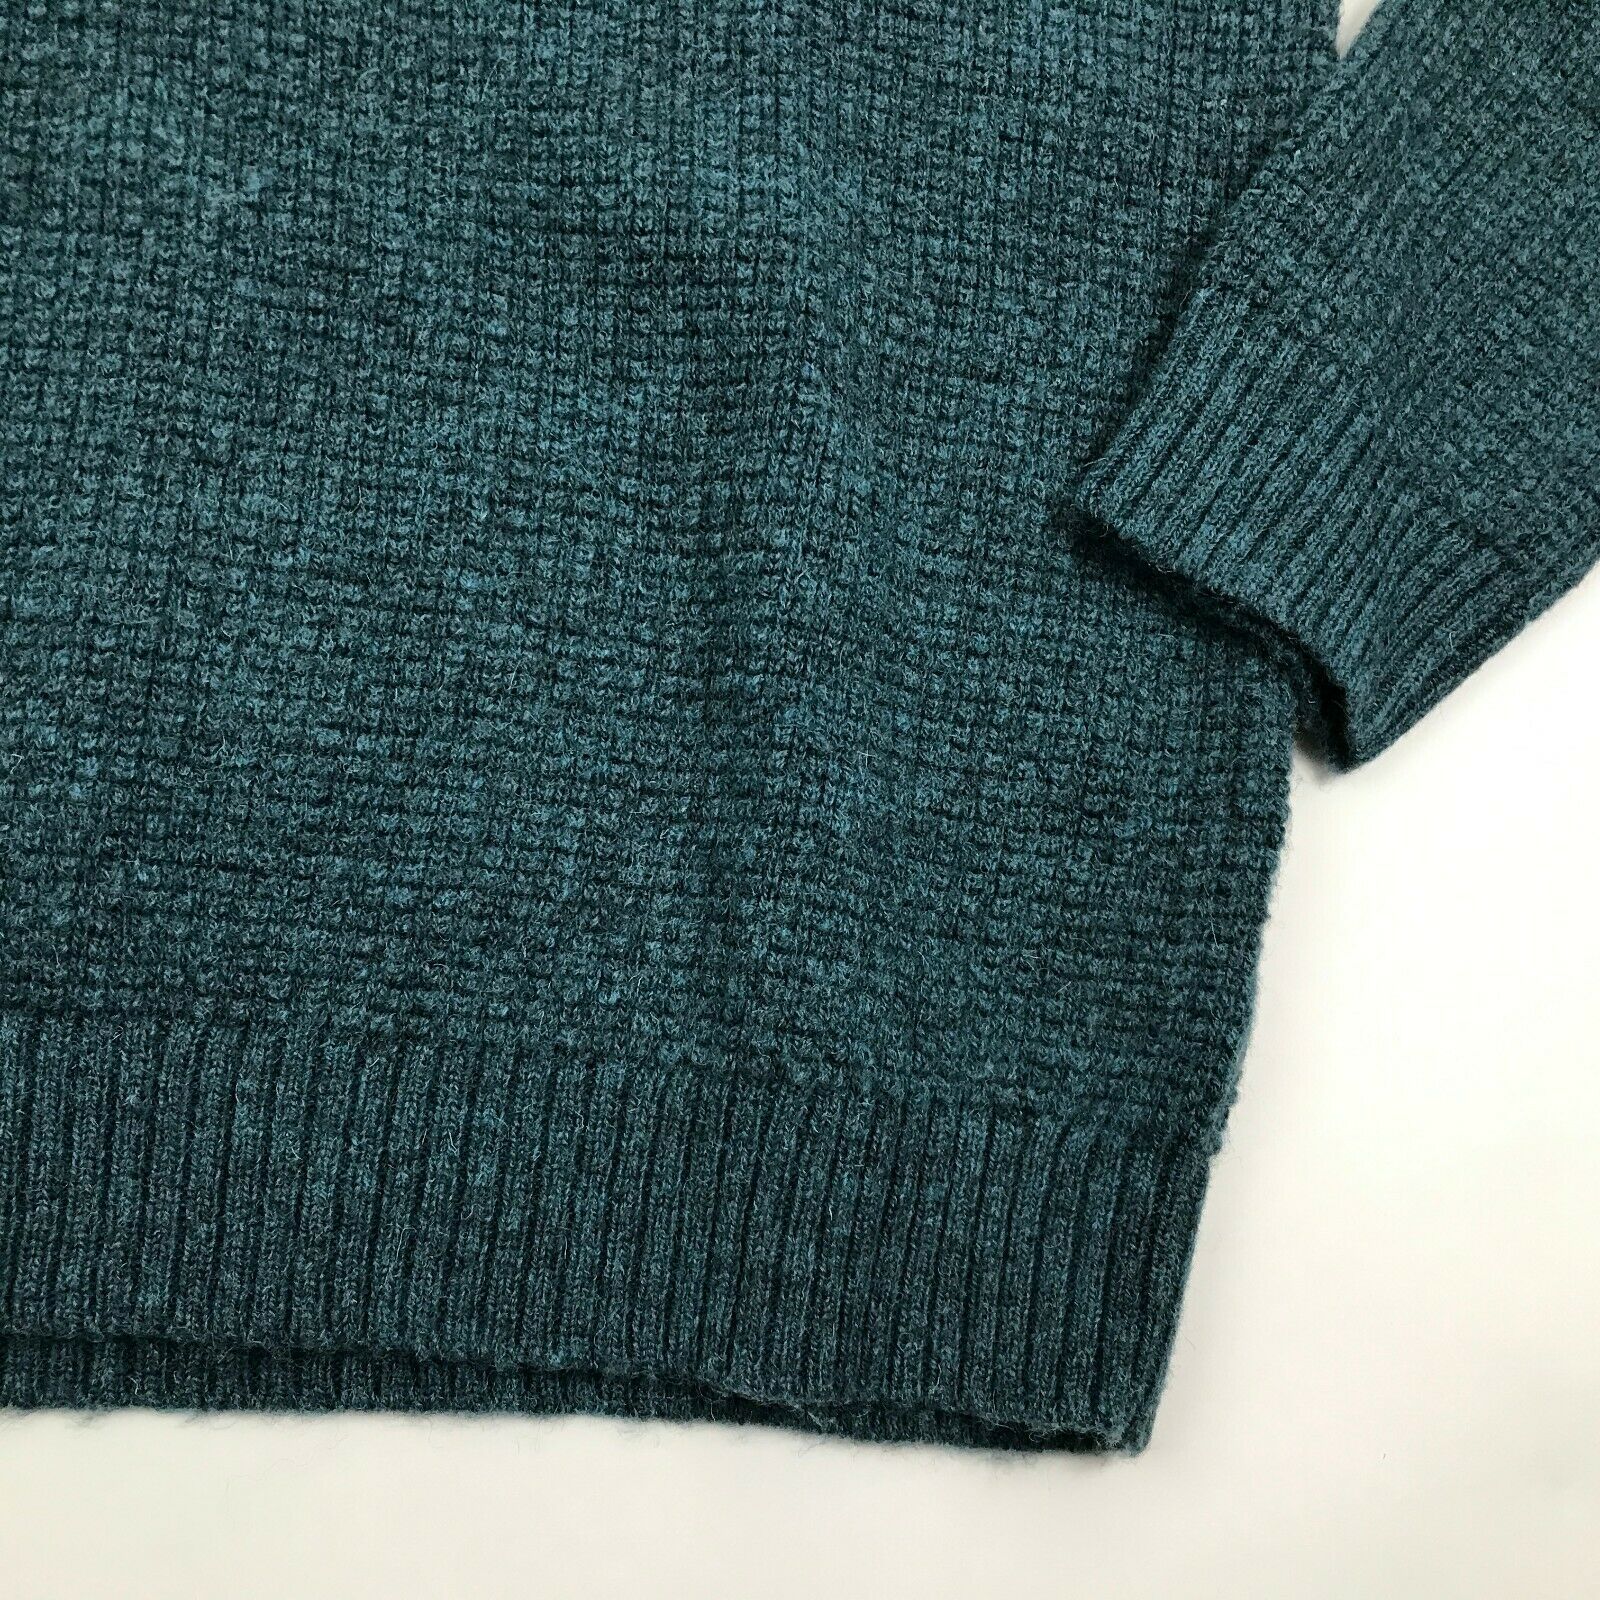 NEW Pendleton Mens Washable Wool 1/4 Zip Sweater Casual Teal Adult Size